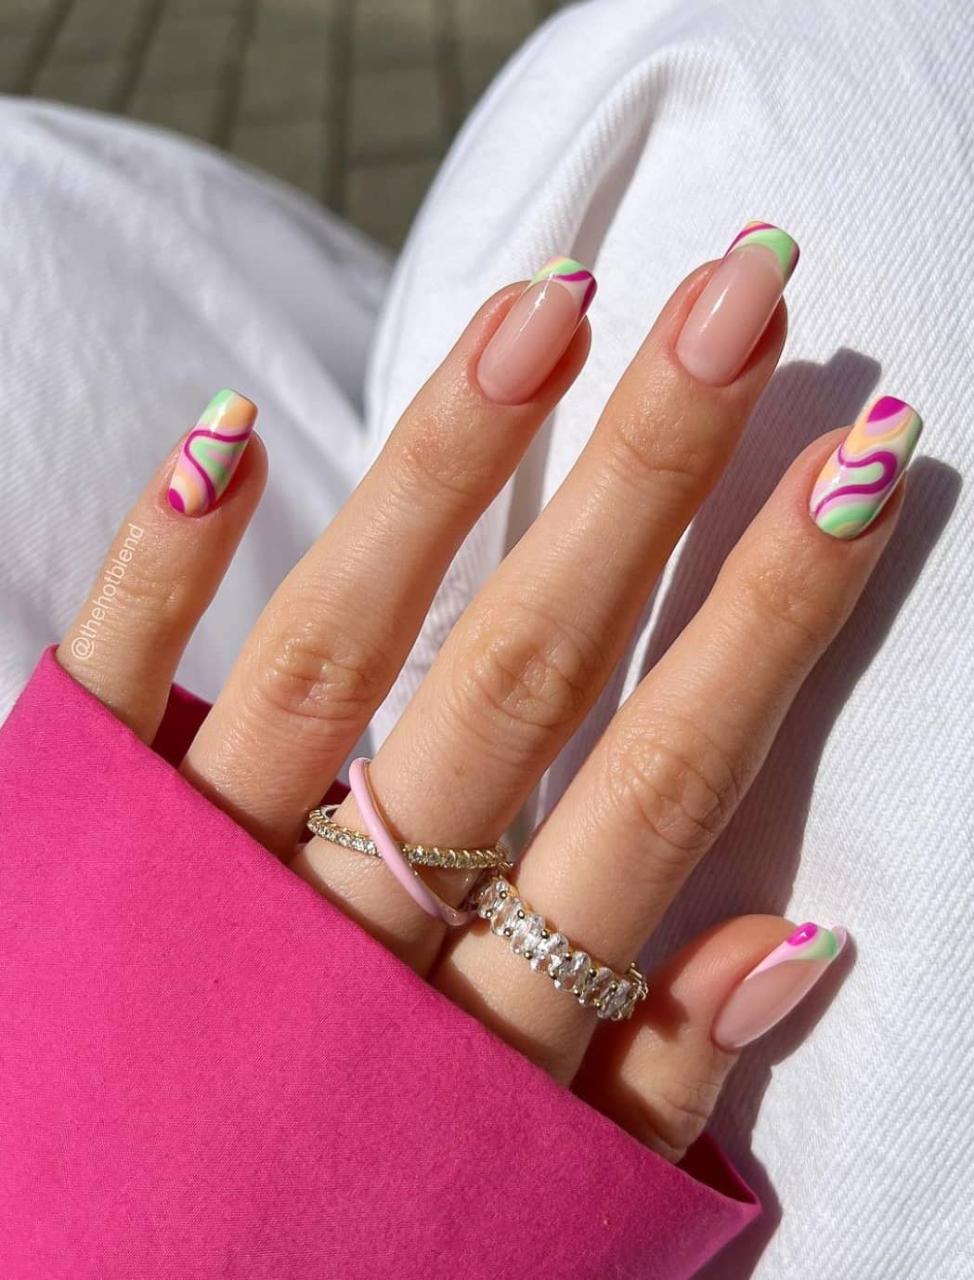 30 Fabulous Swirl Nail Designs So Easy To Copy - 193